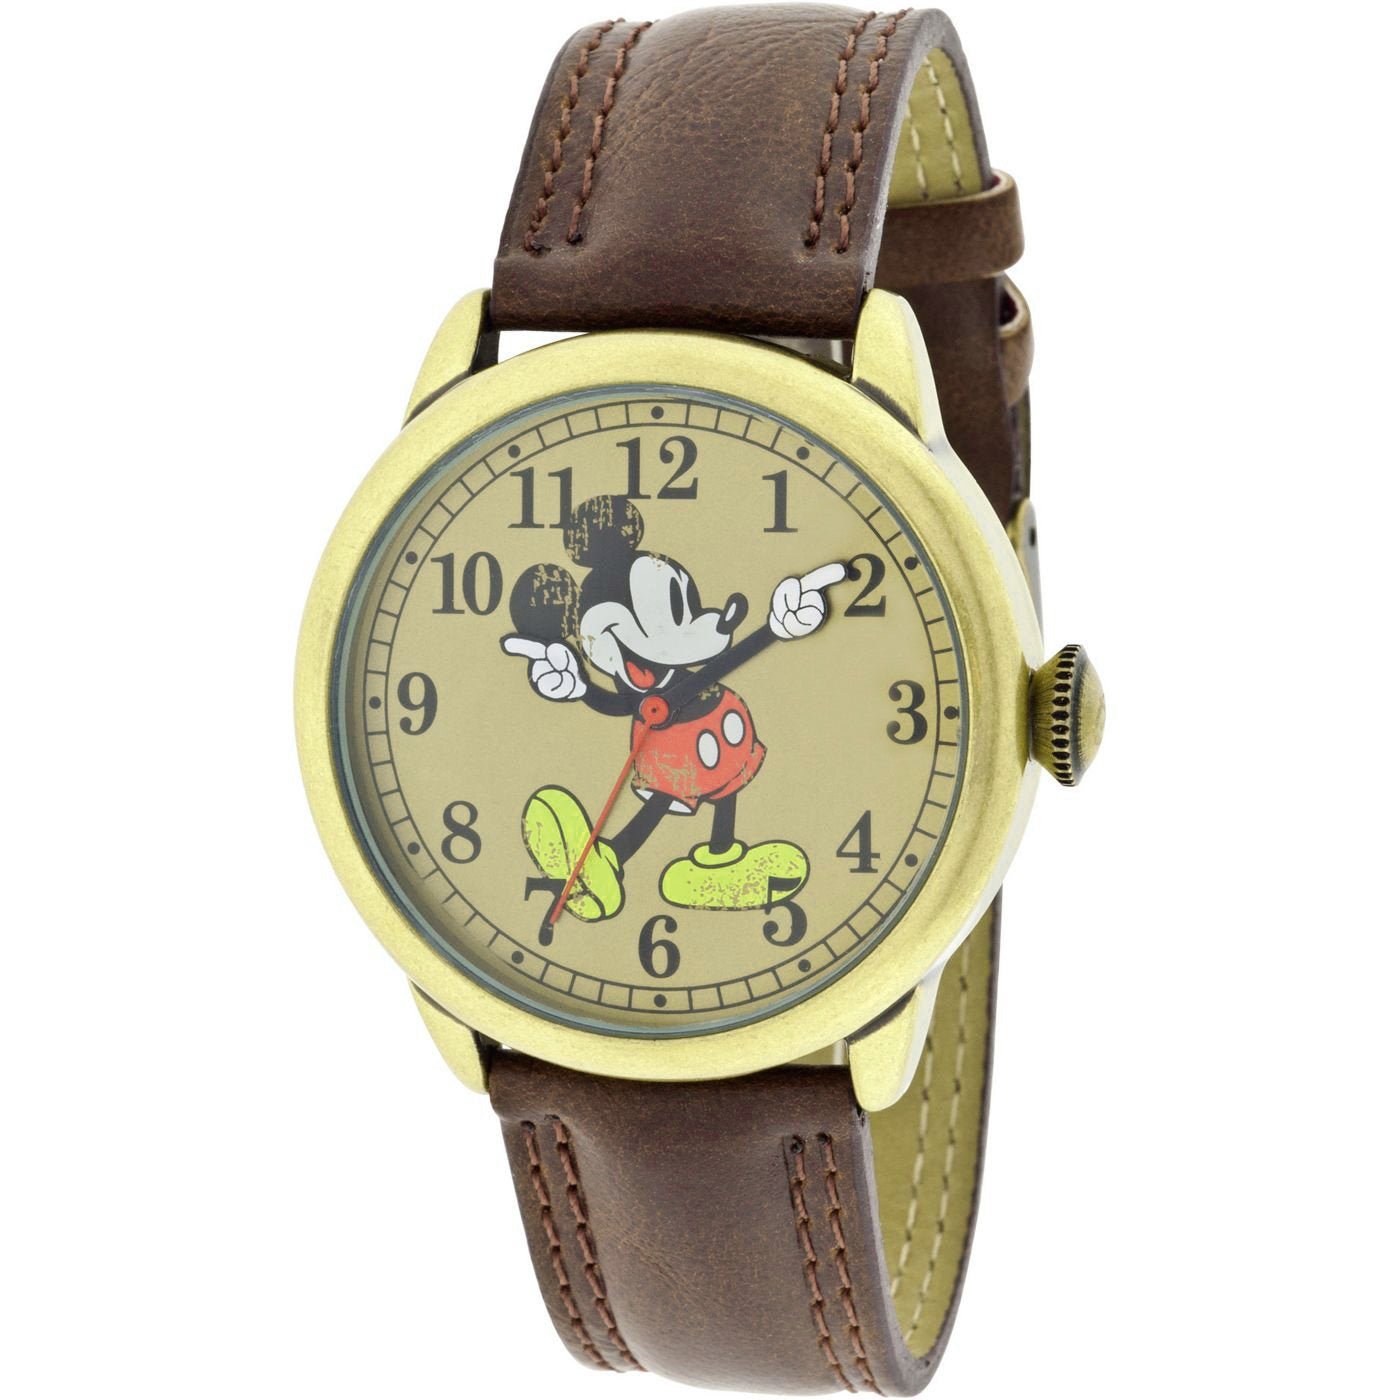 Model: Vintage Style Disney Mickey Mouse Molded-Hands Watch with Brown Strap